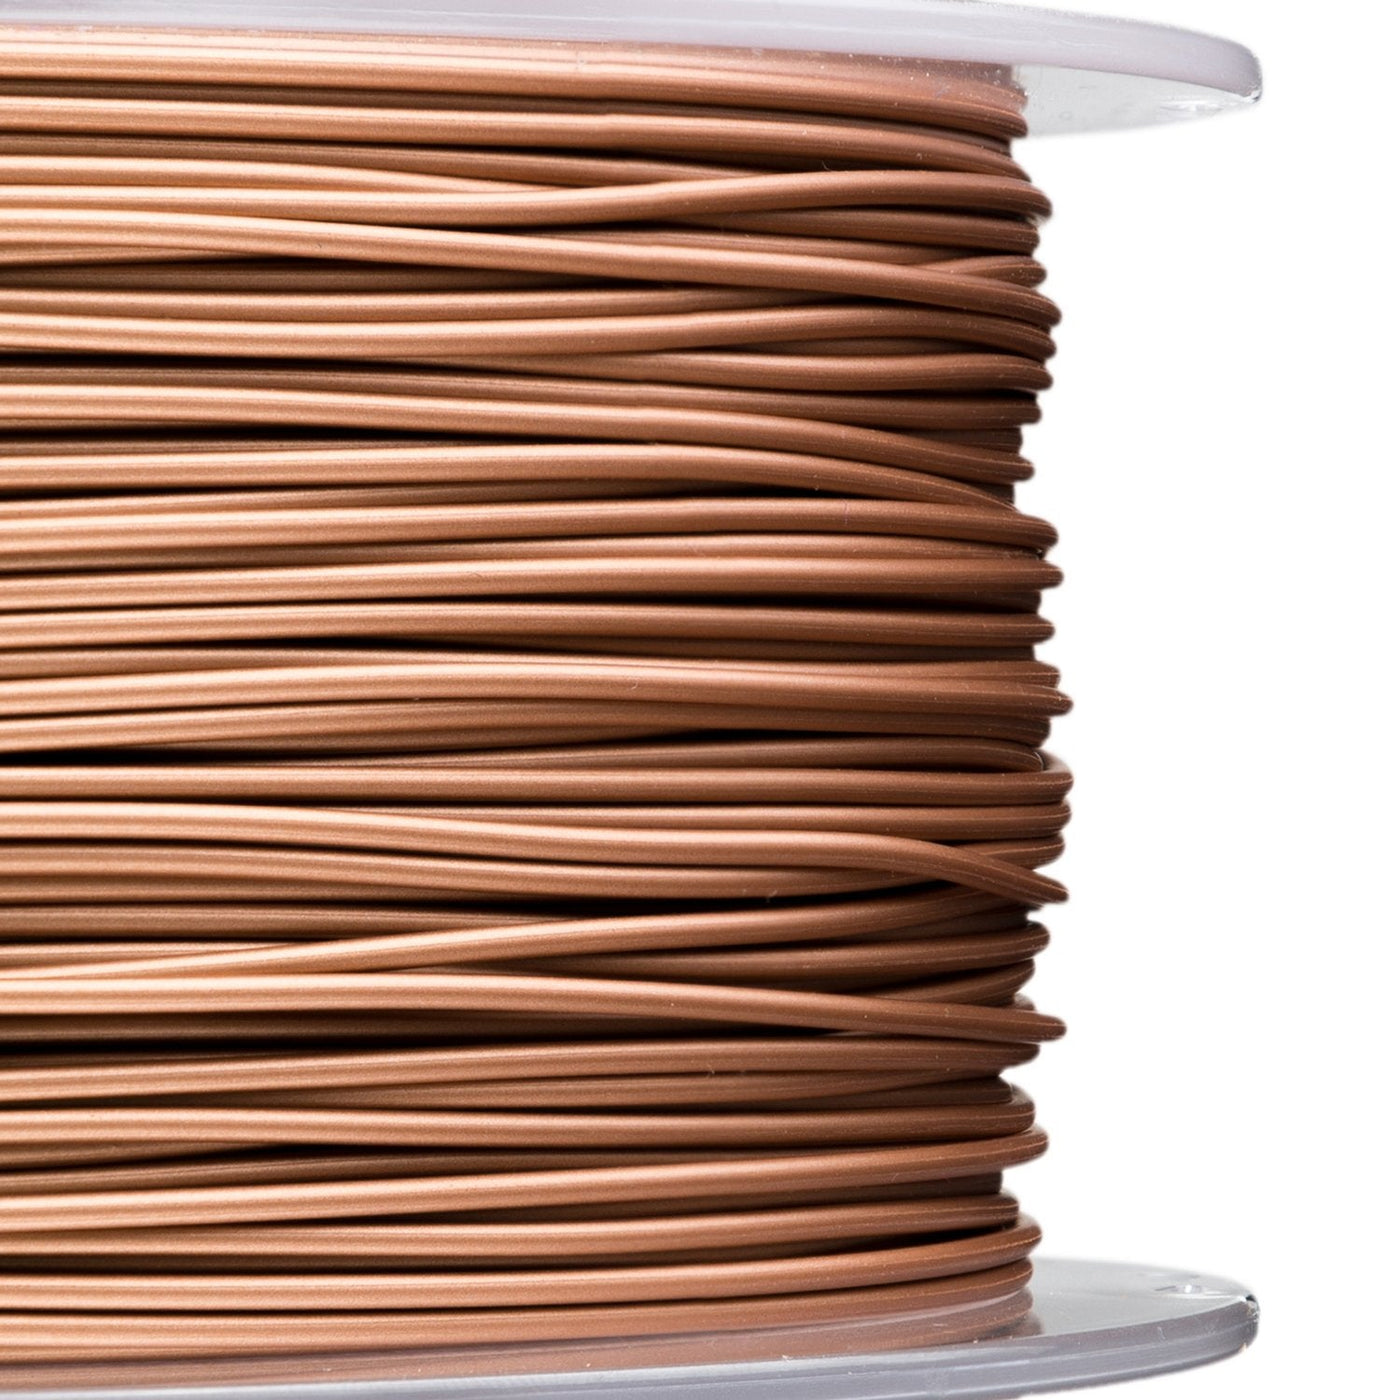 BROWN PAINT FREE ABS FILAMENT - 1.75MM, 1KG SPOOL